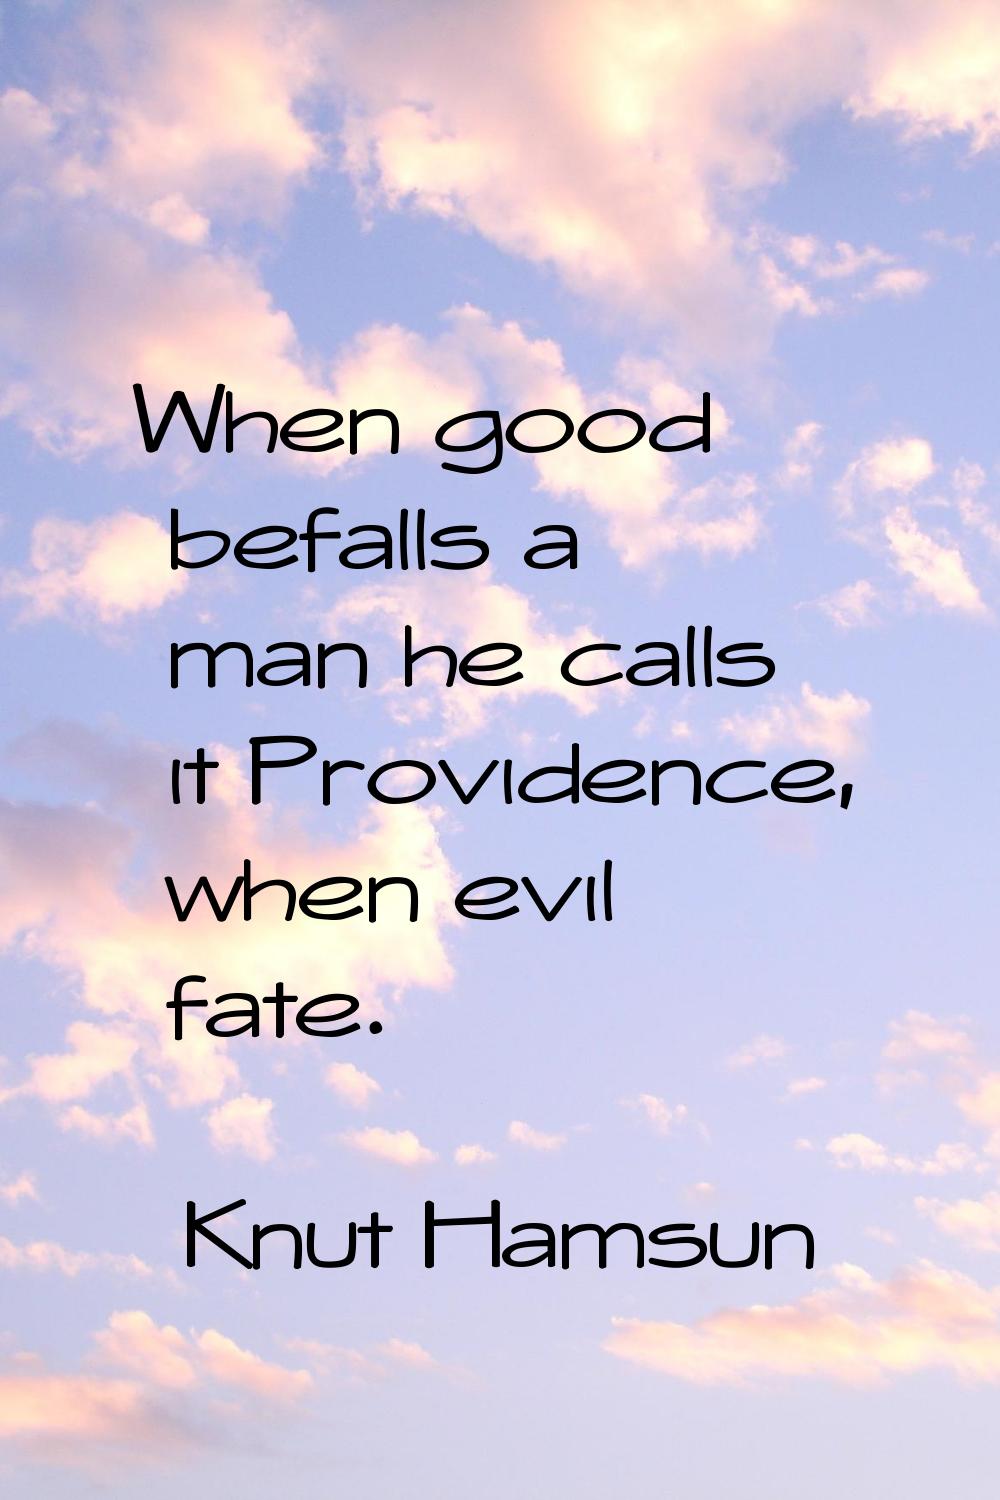 When good befalls a man he calls it Providence, when evil fate.